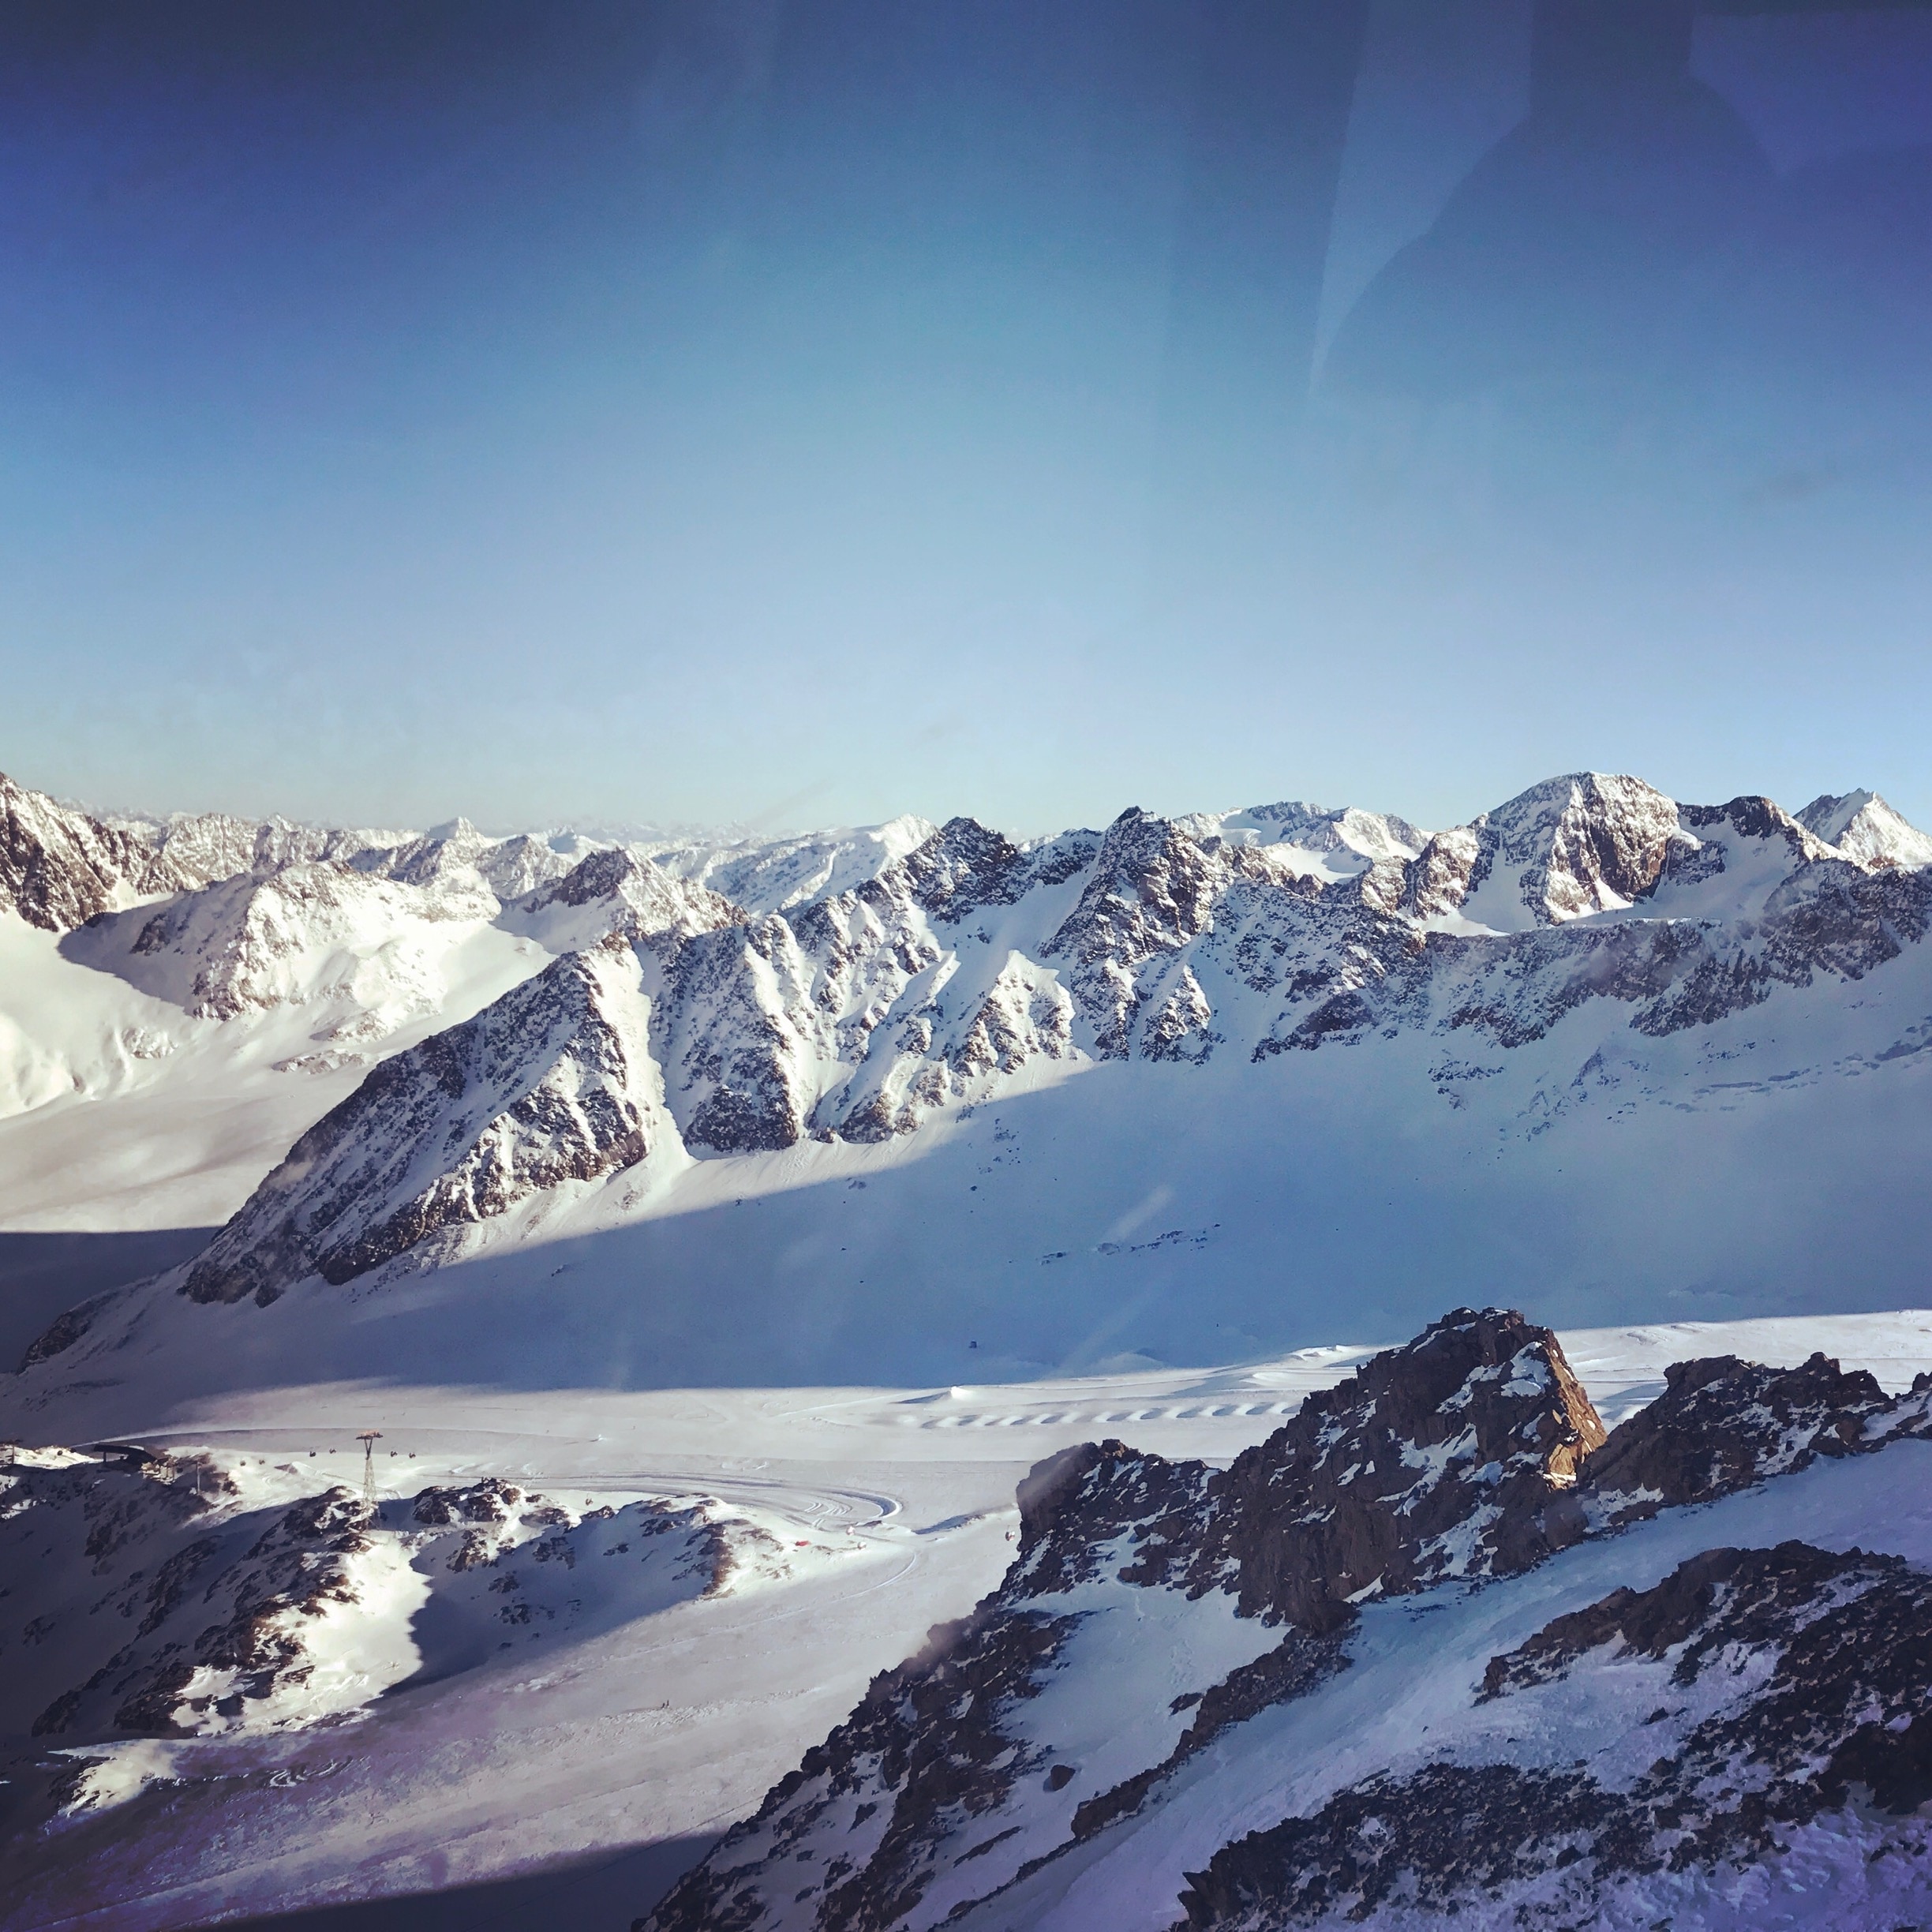 Great panoramic view from Pitztal Glacier 😍